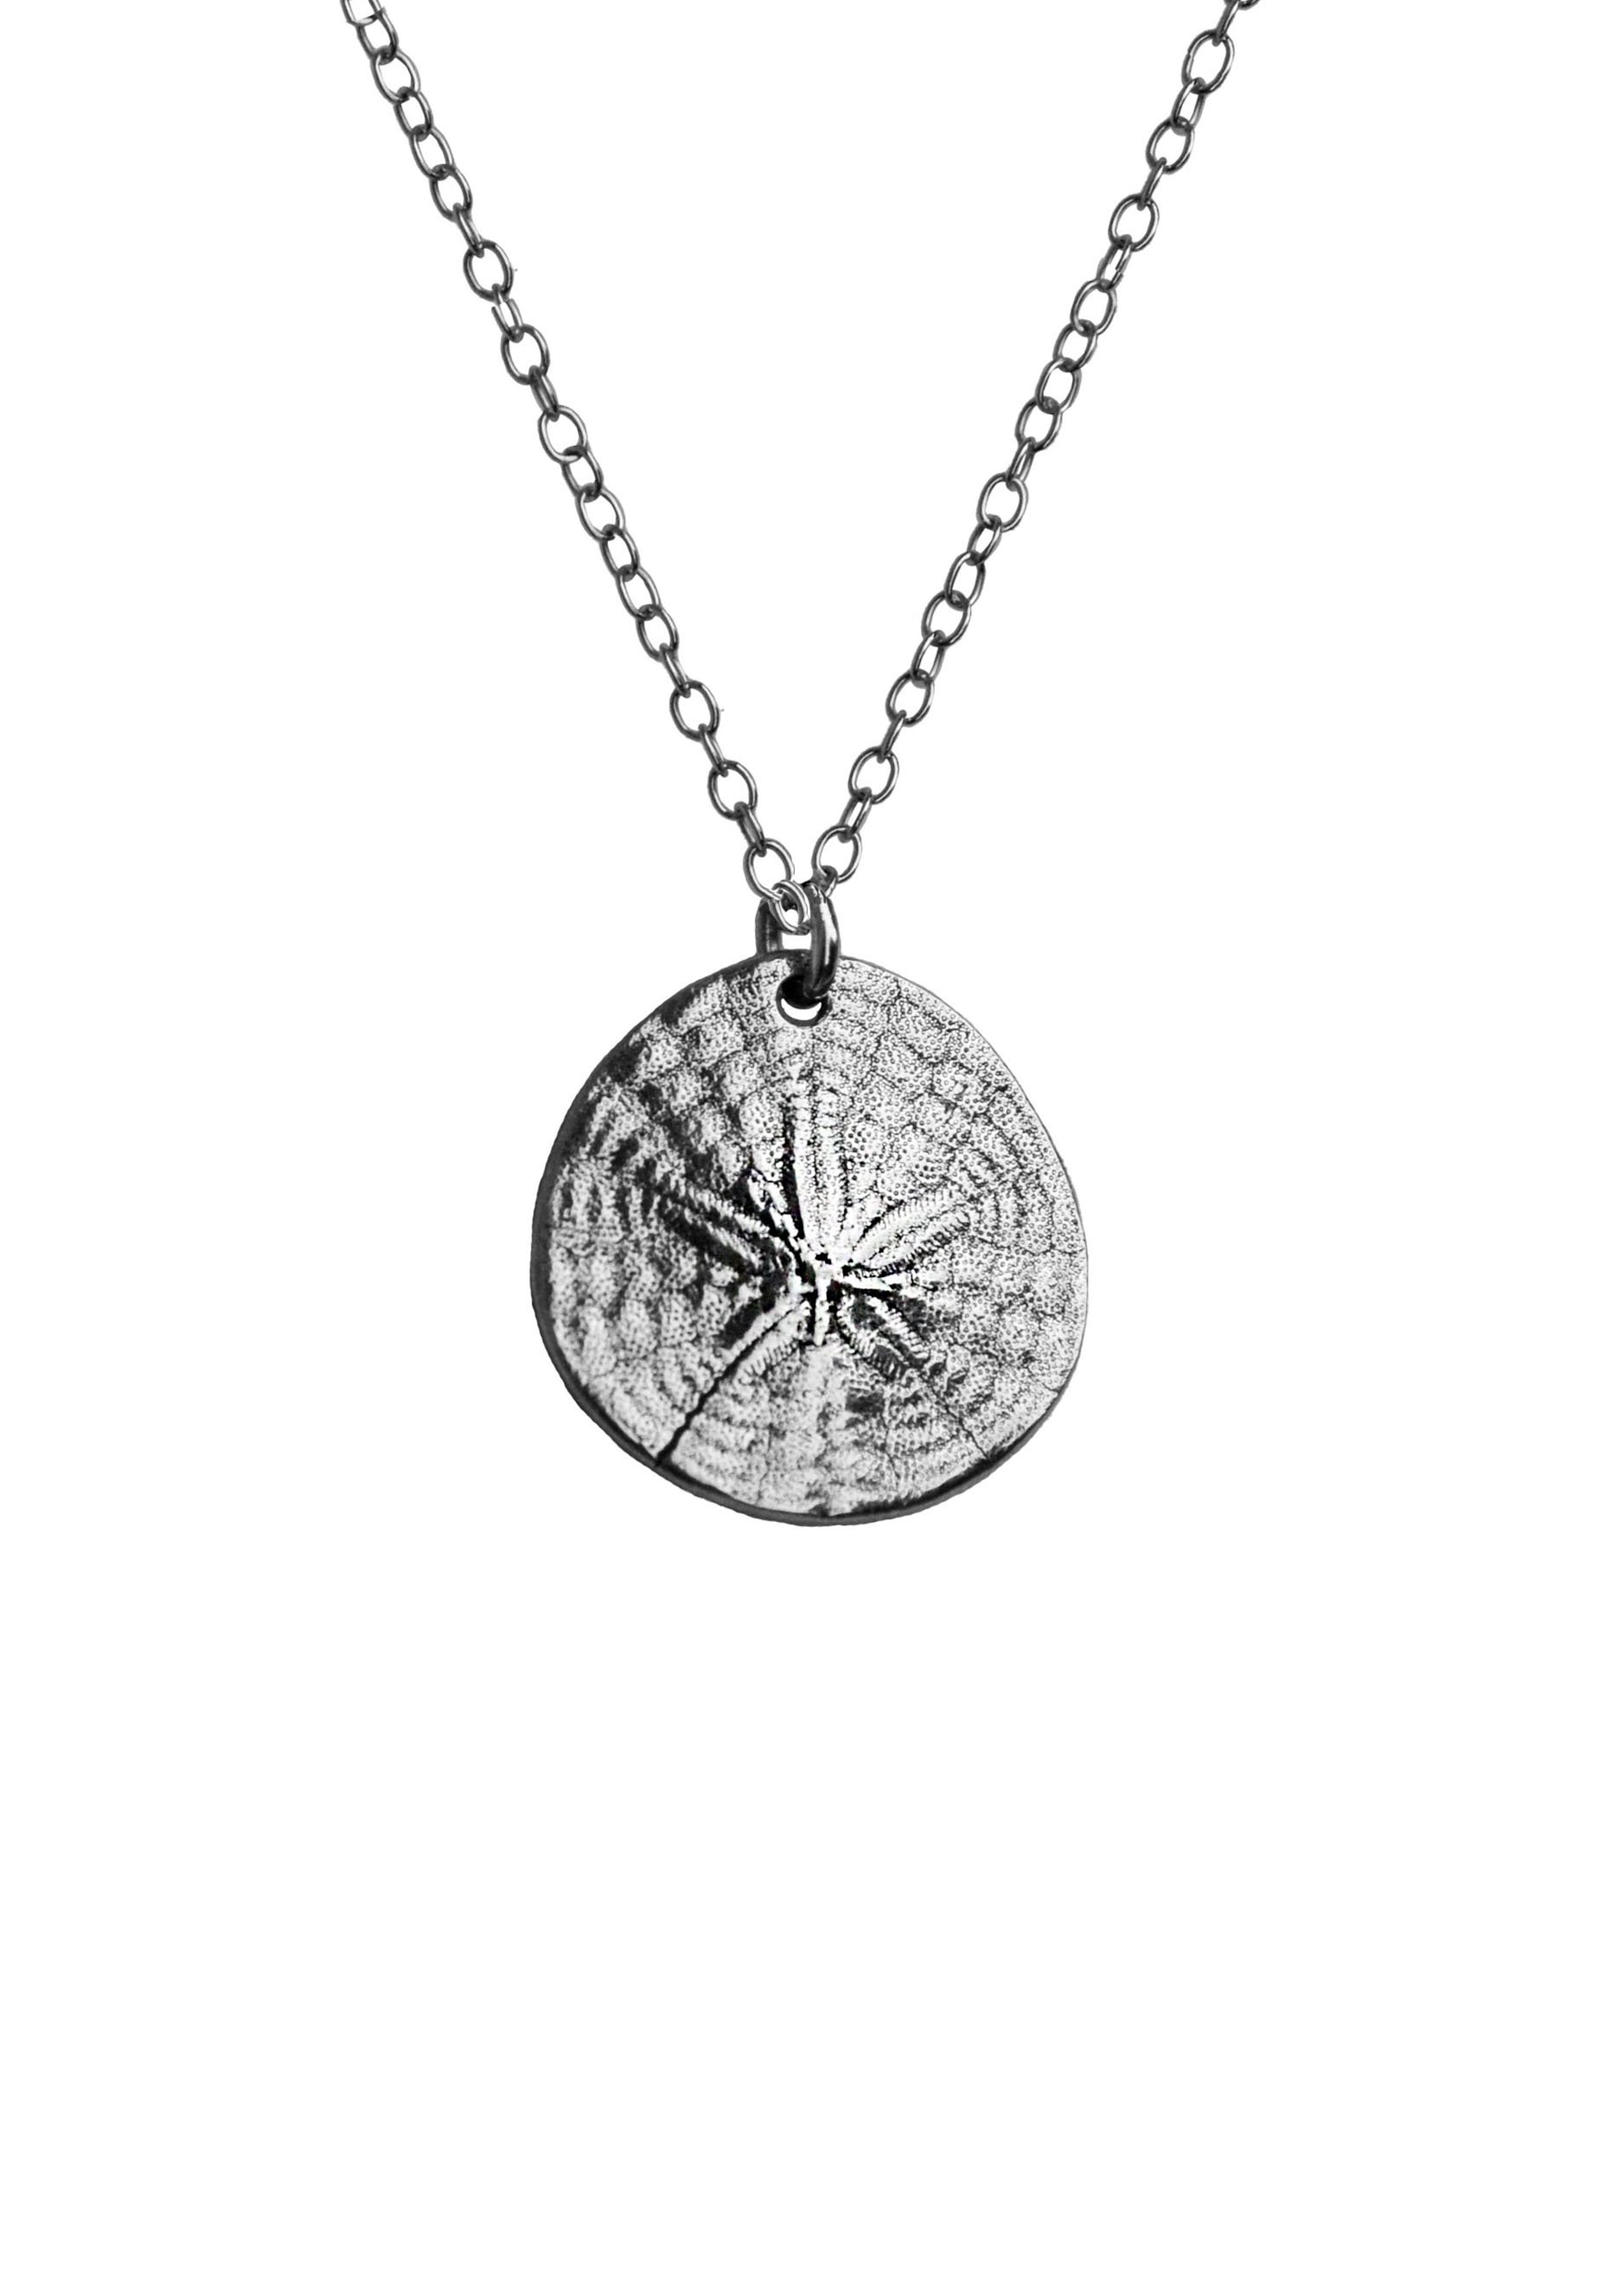 Buy Sand Dollar Necklace Tiny Silver Sanddollar Charm Necklace 925 Sterling  Silver Jewelry Online in India - Etsy